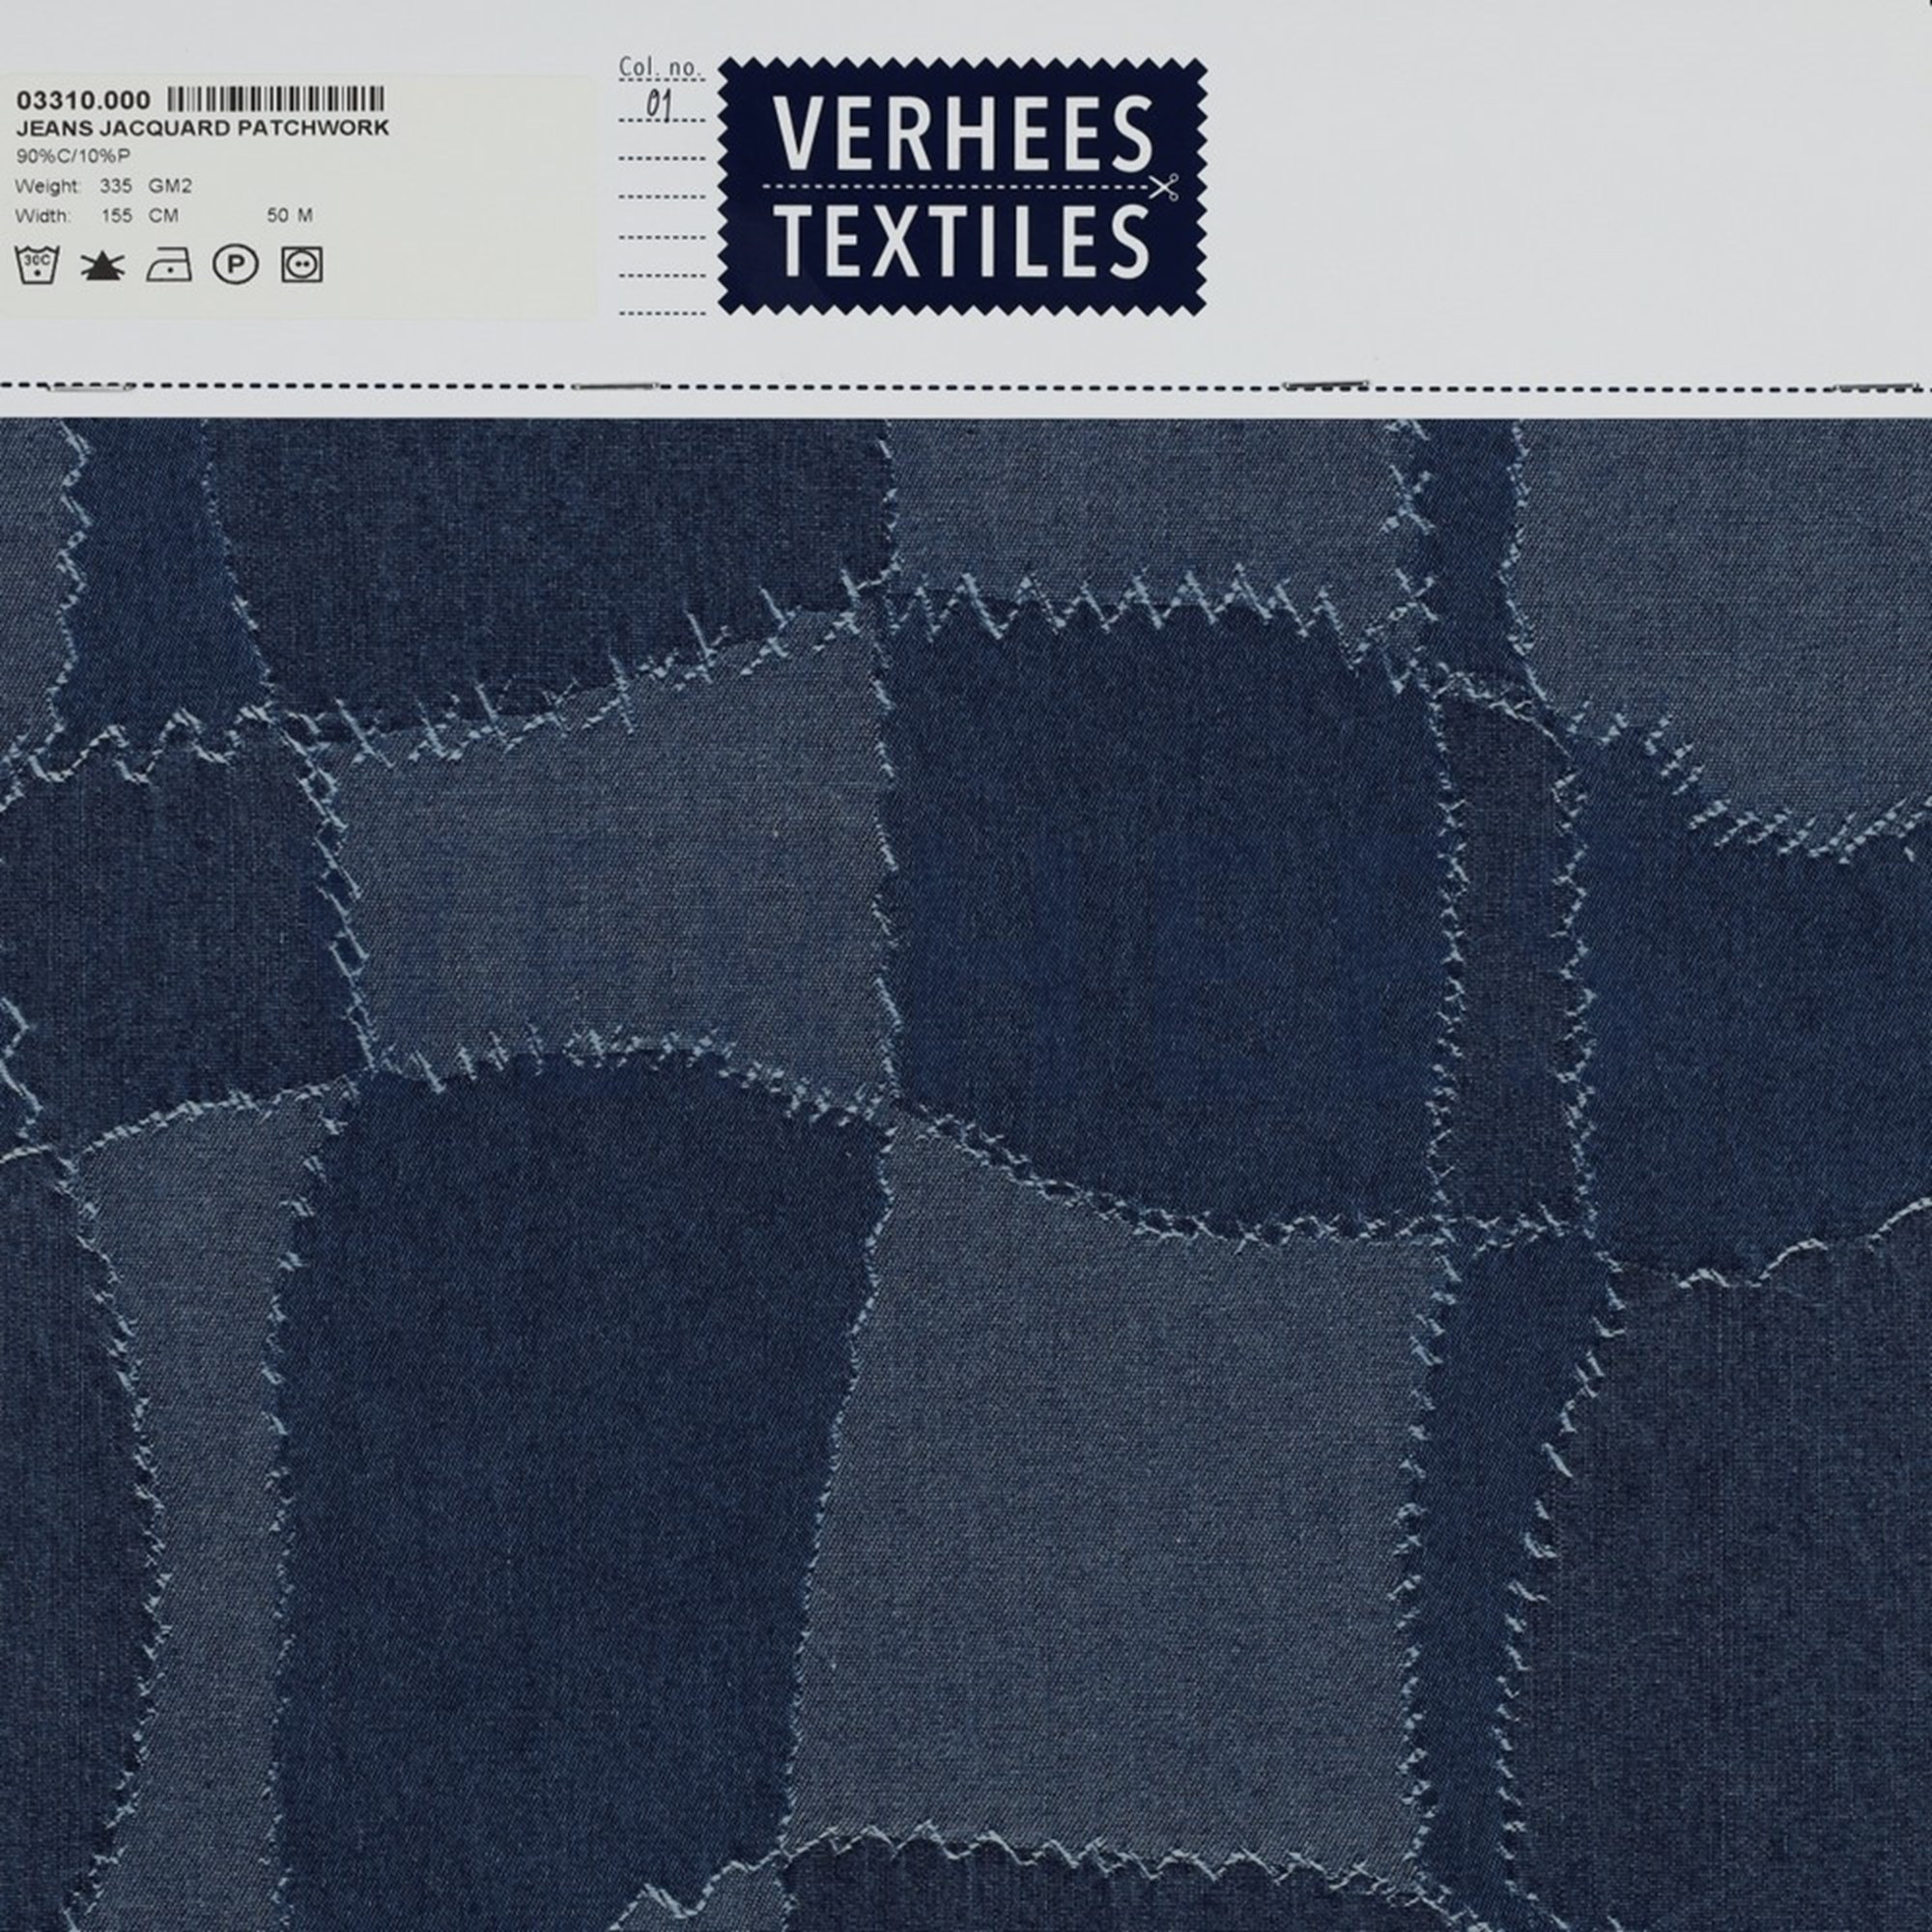 JEANS JACQUARD PATCHWORK JEANS (high resolution) #4